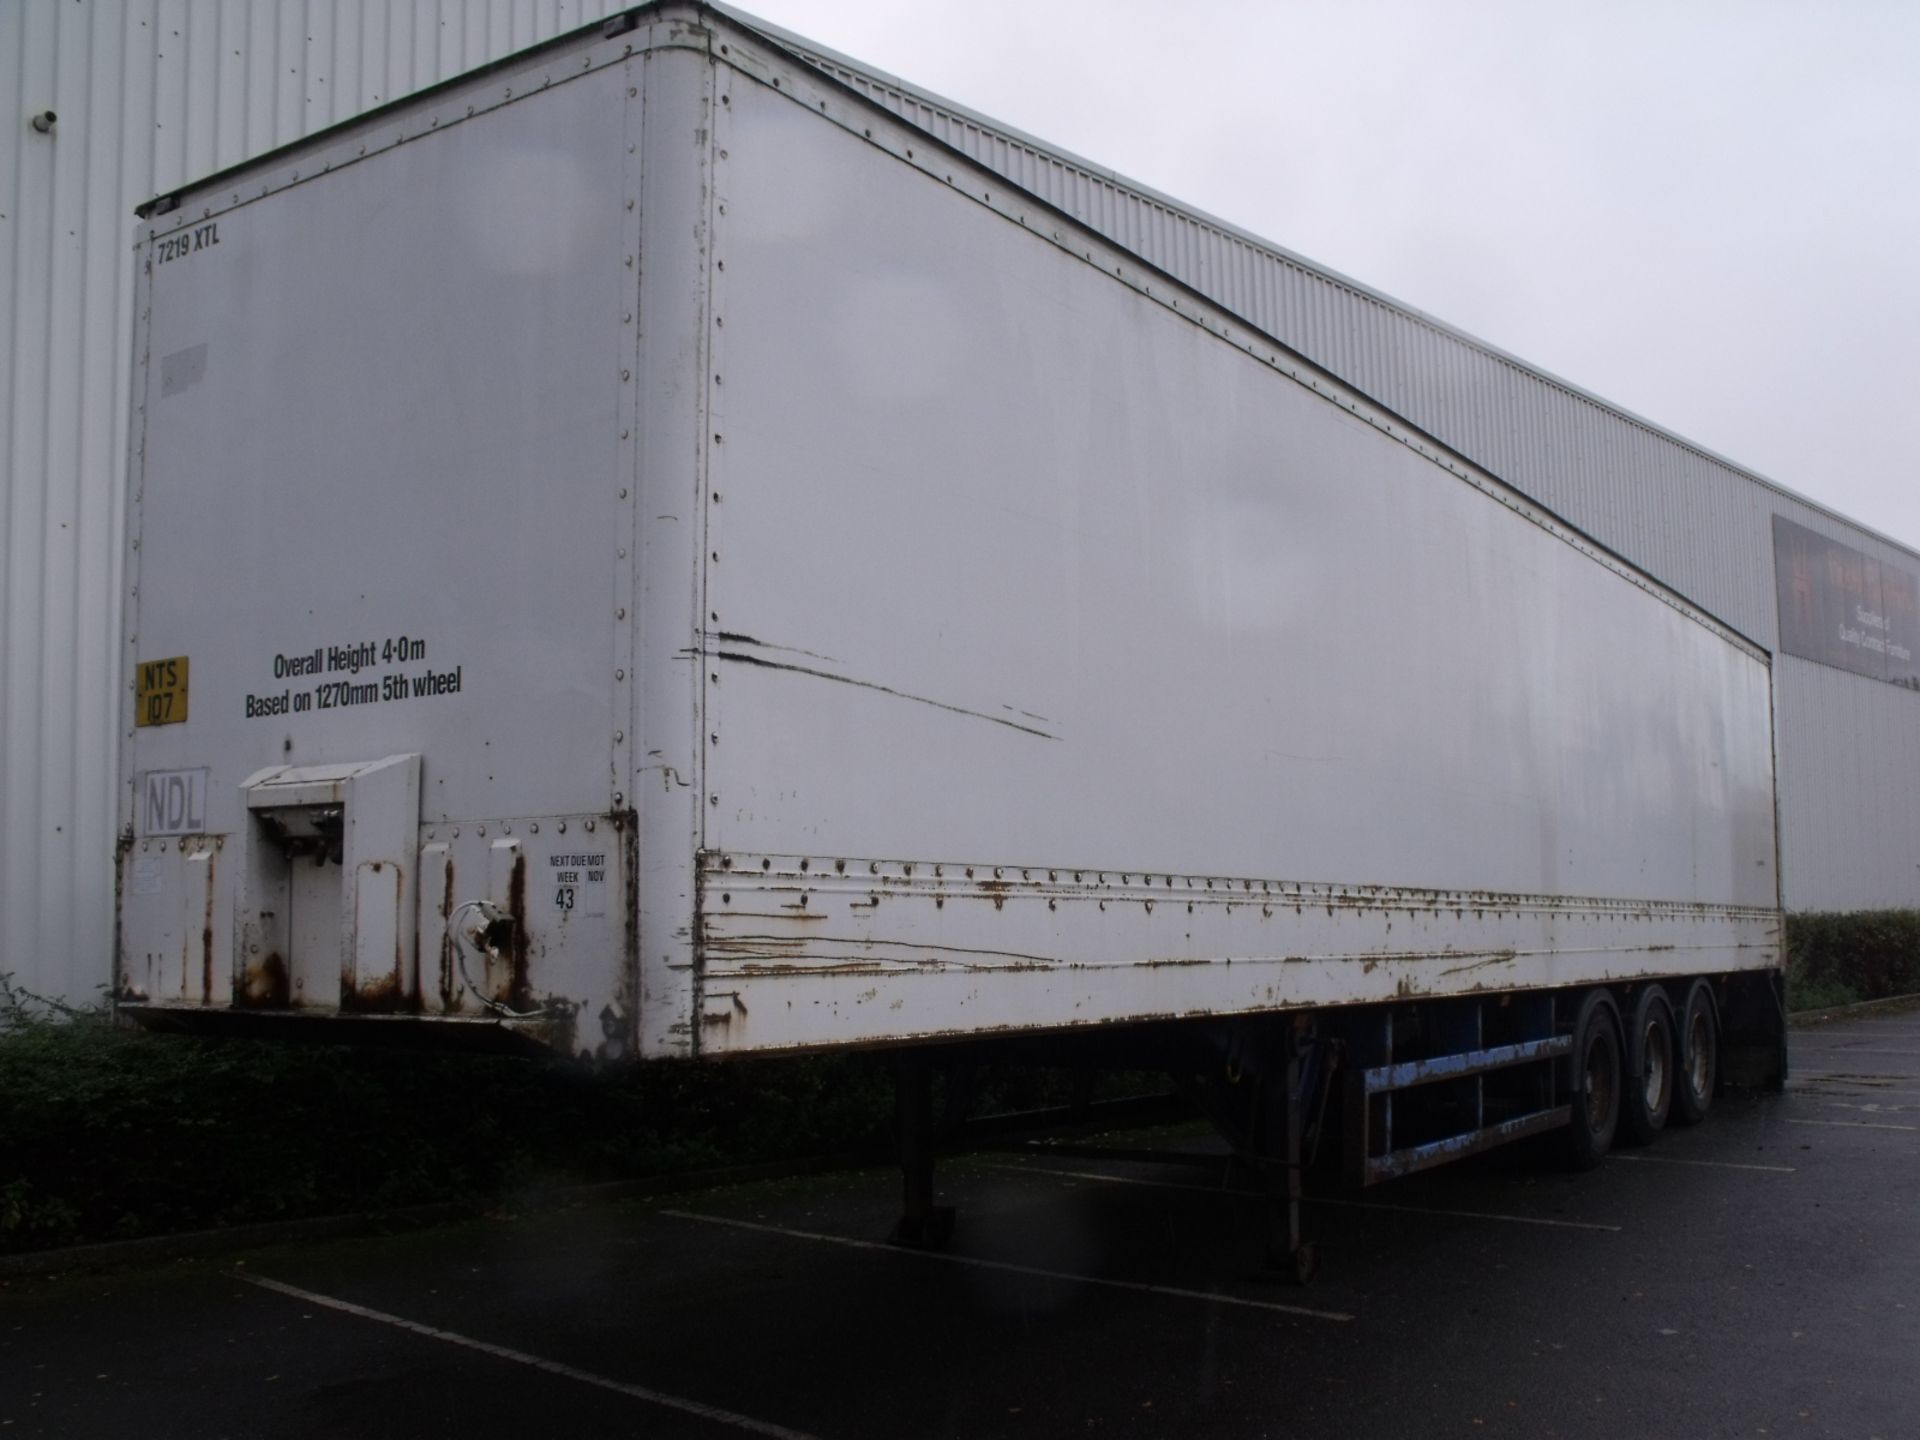 Montracon tri axle artic unit with tail lift 1996 good tyres etc run out of test